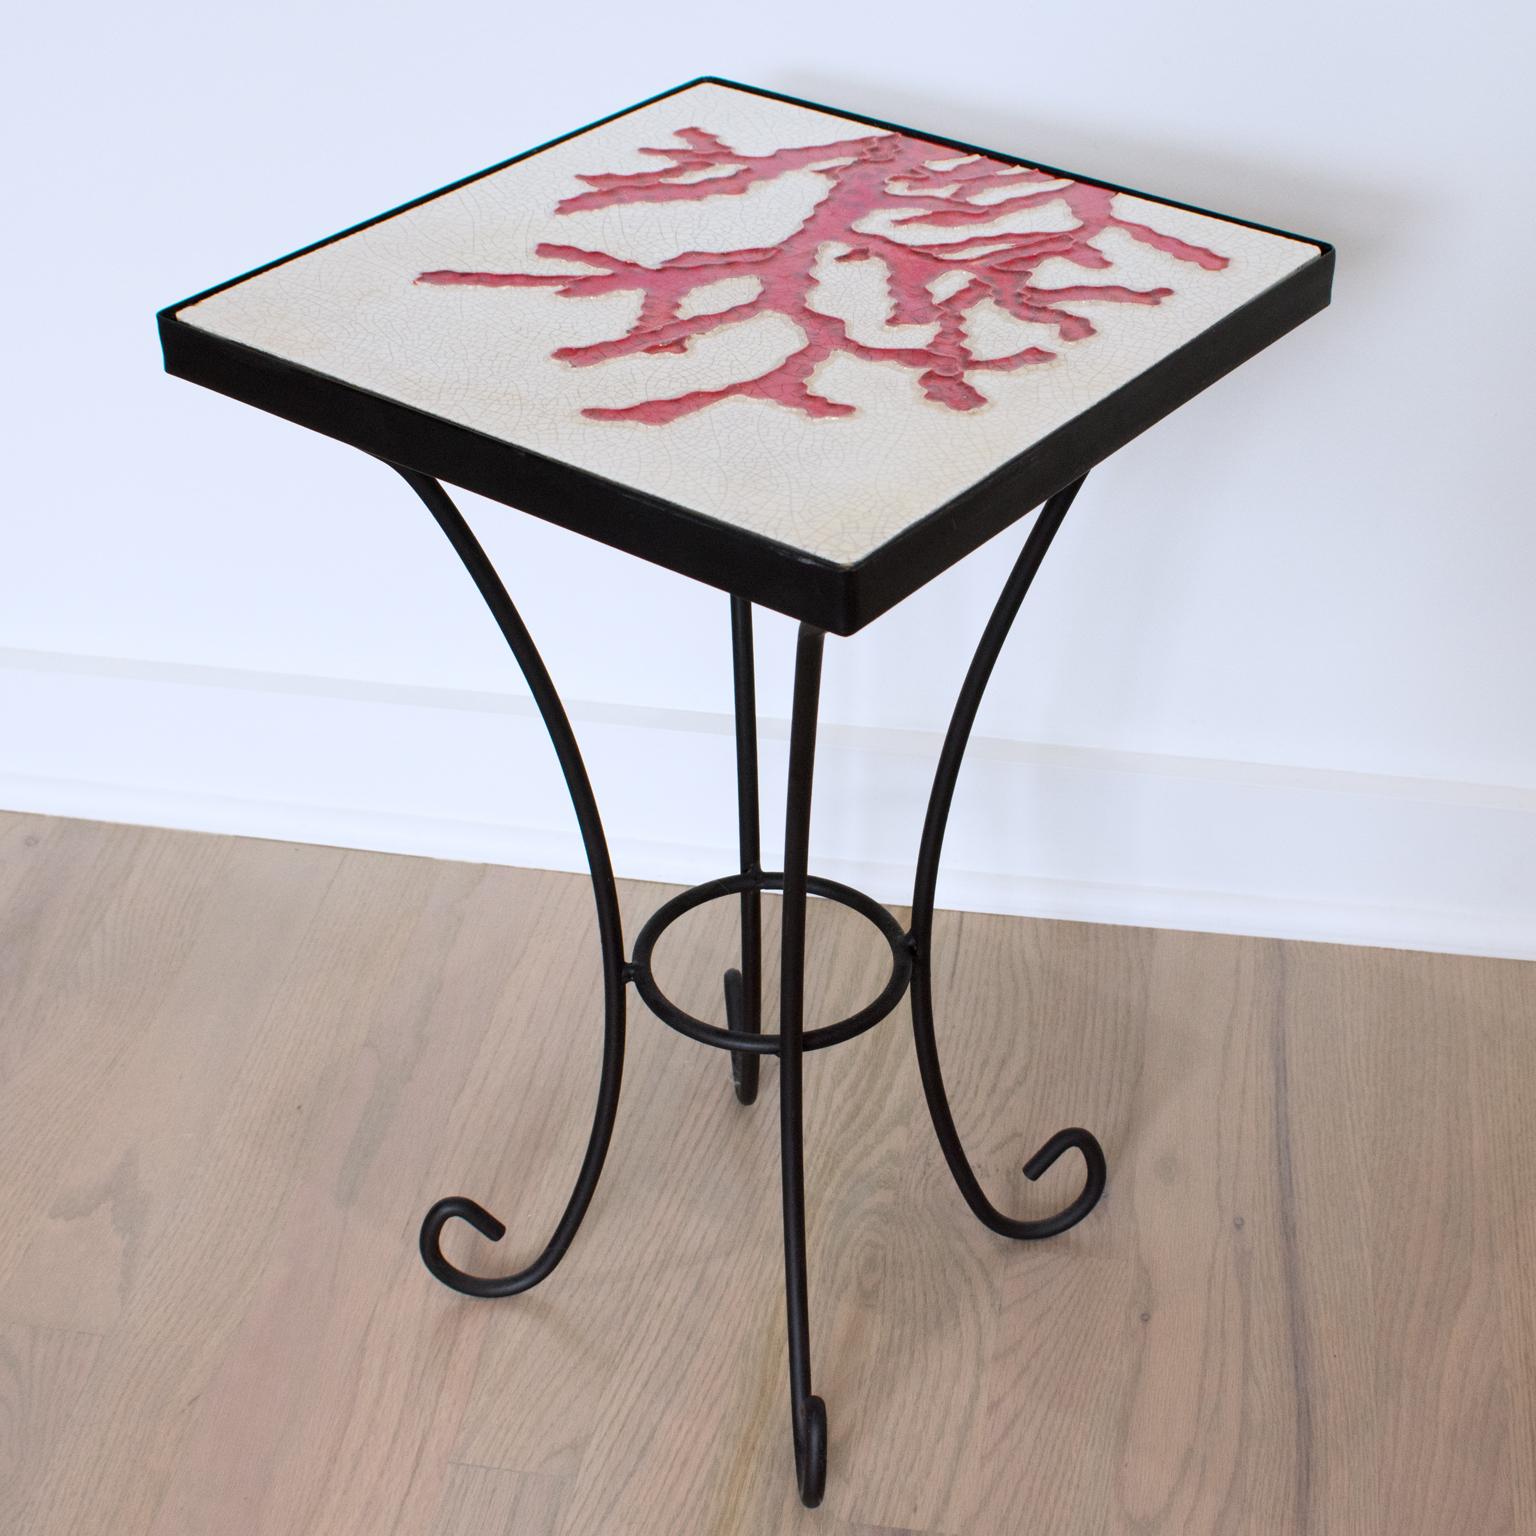 Wrought Iron and Ceramic Tile Side Coffee Table, a pair, 1950s For Sale 8